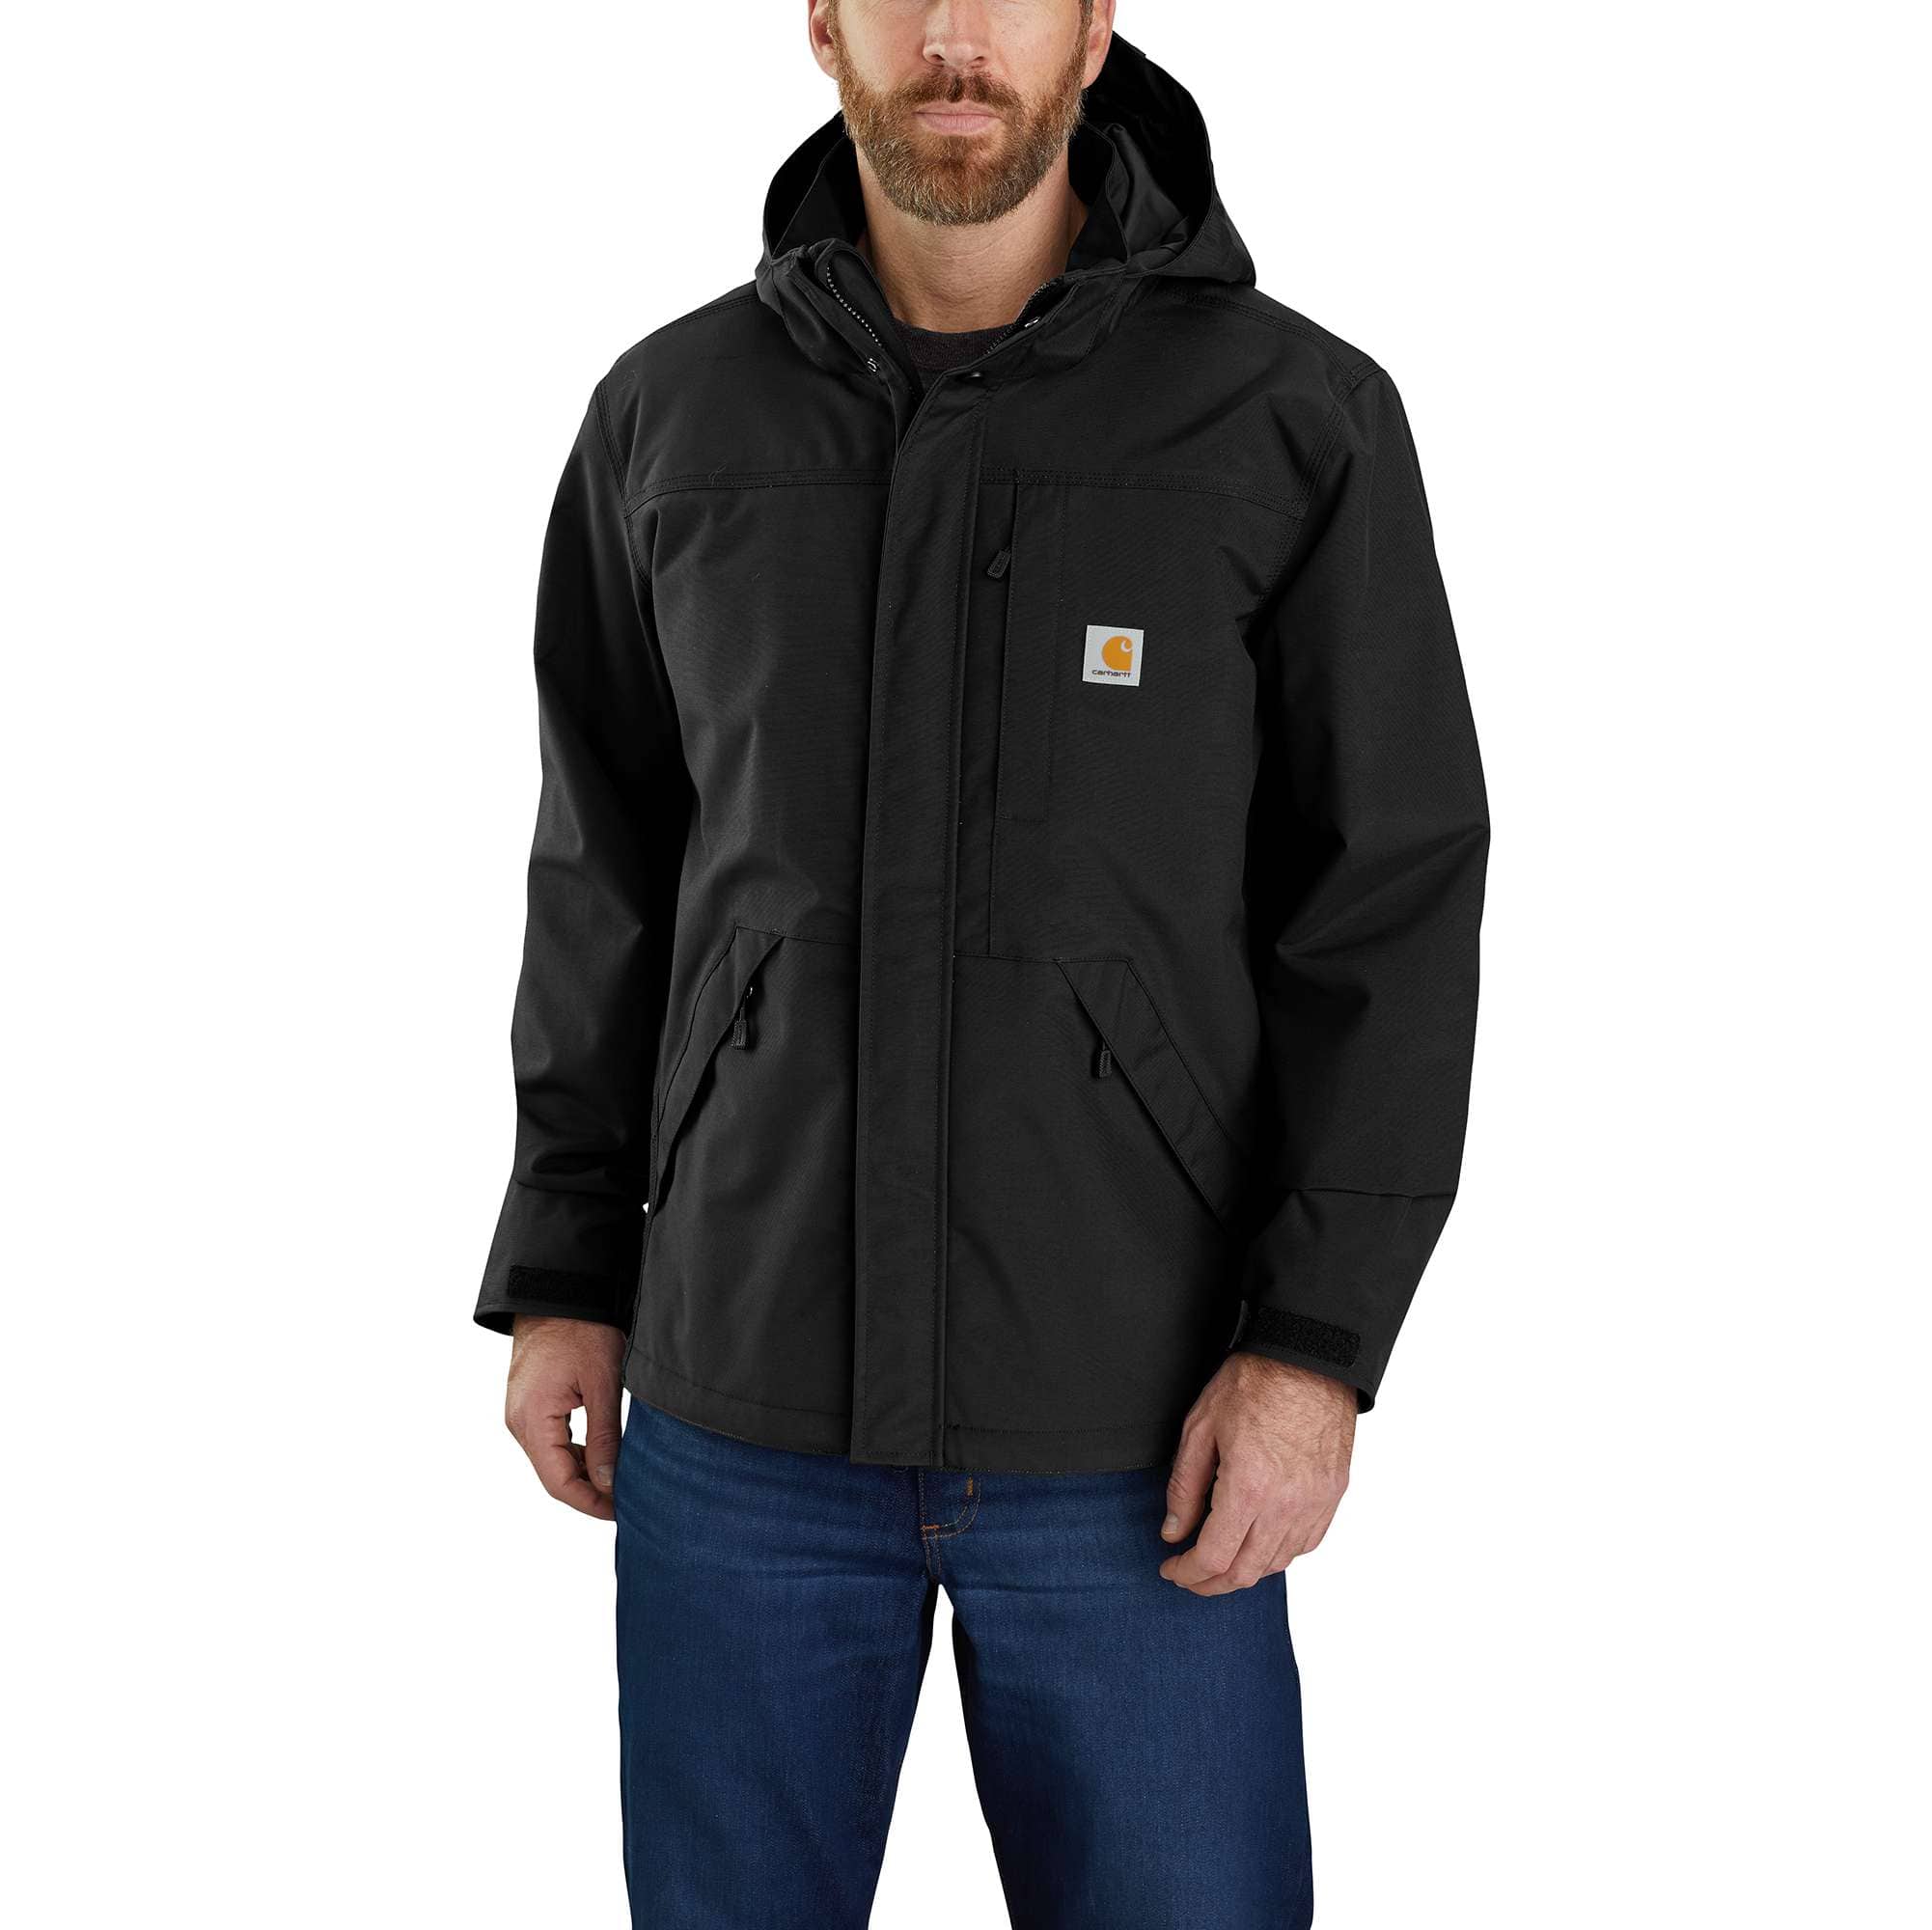 Storm Defender® Relaxed Fit Heavyweight Jacket | Carhartt Company Gear